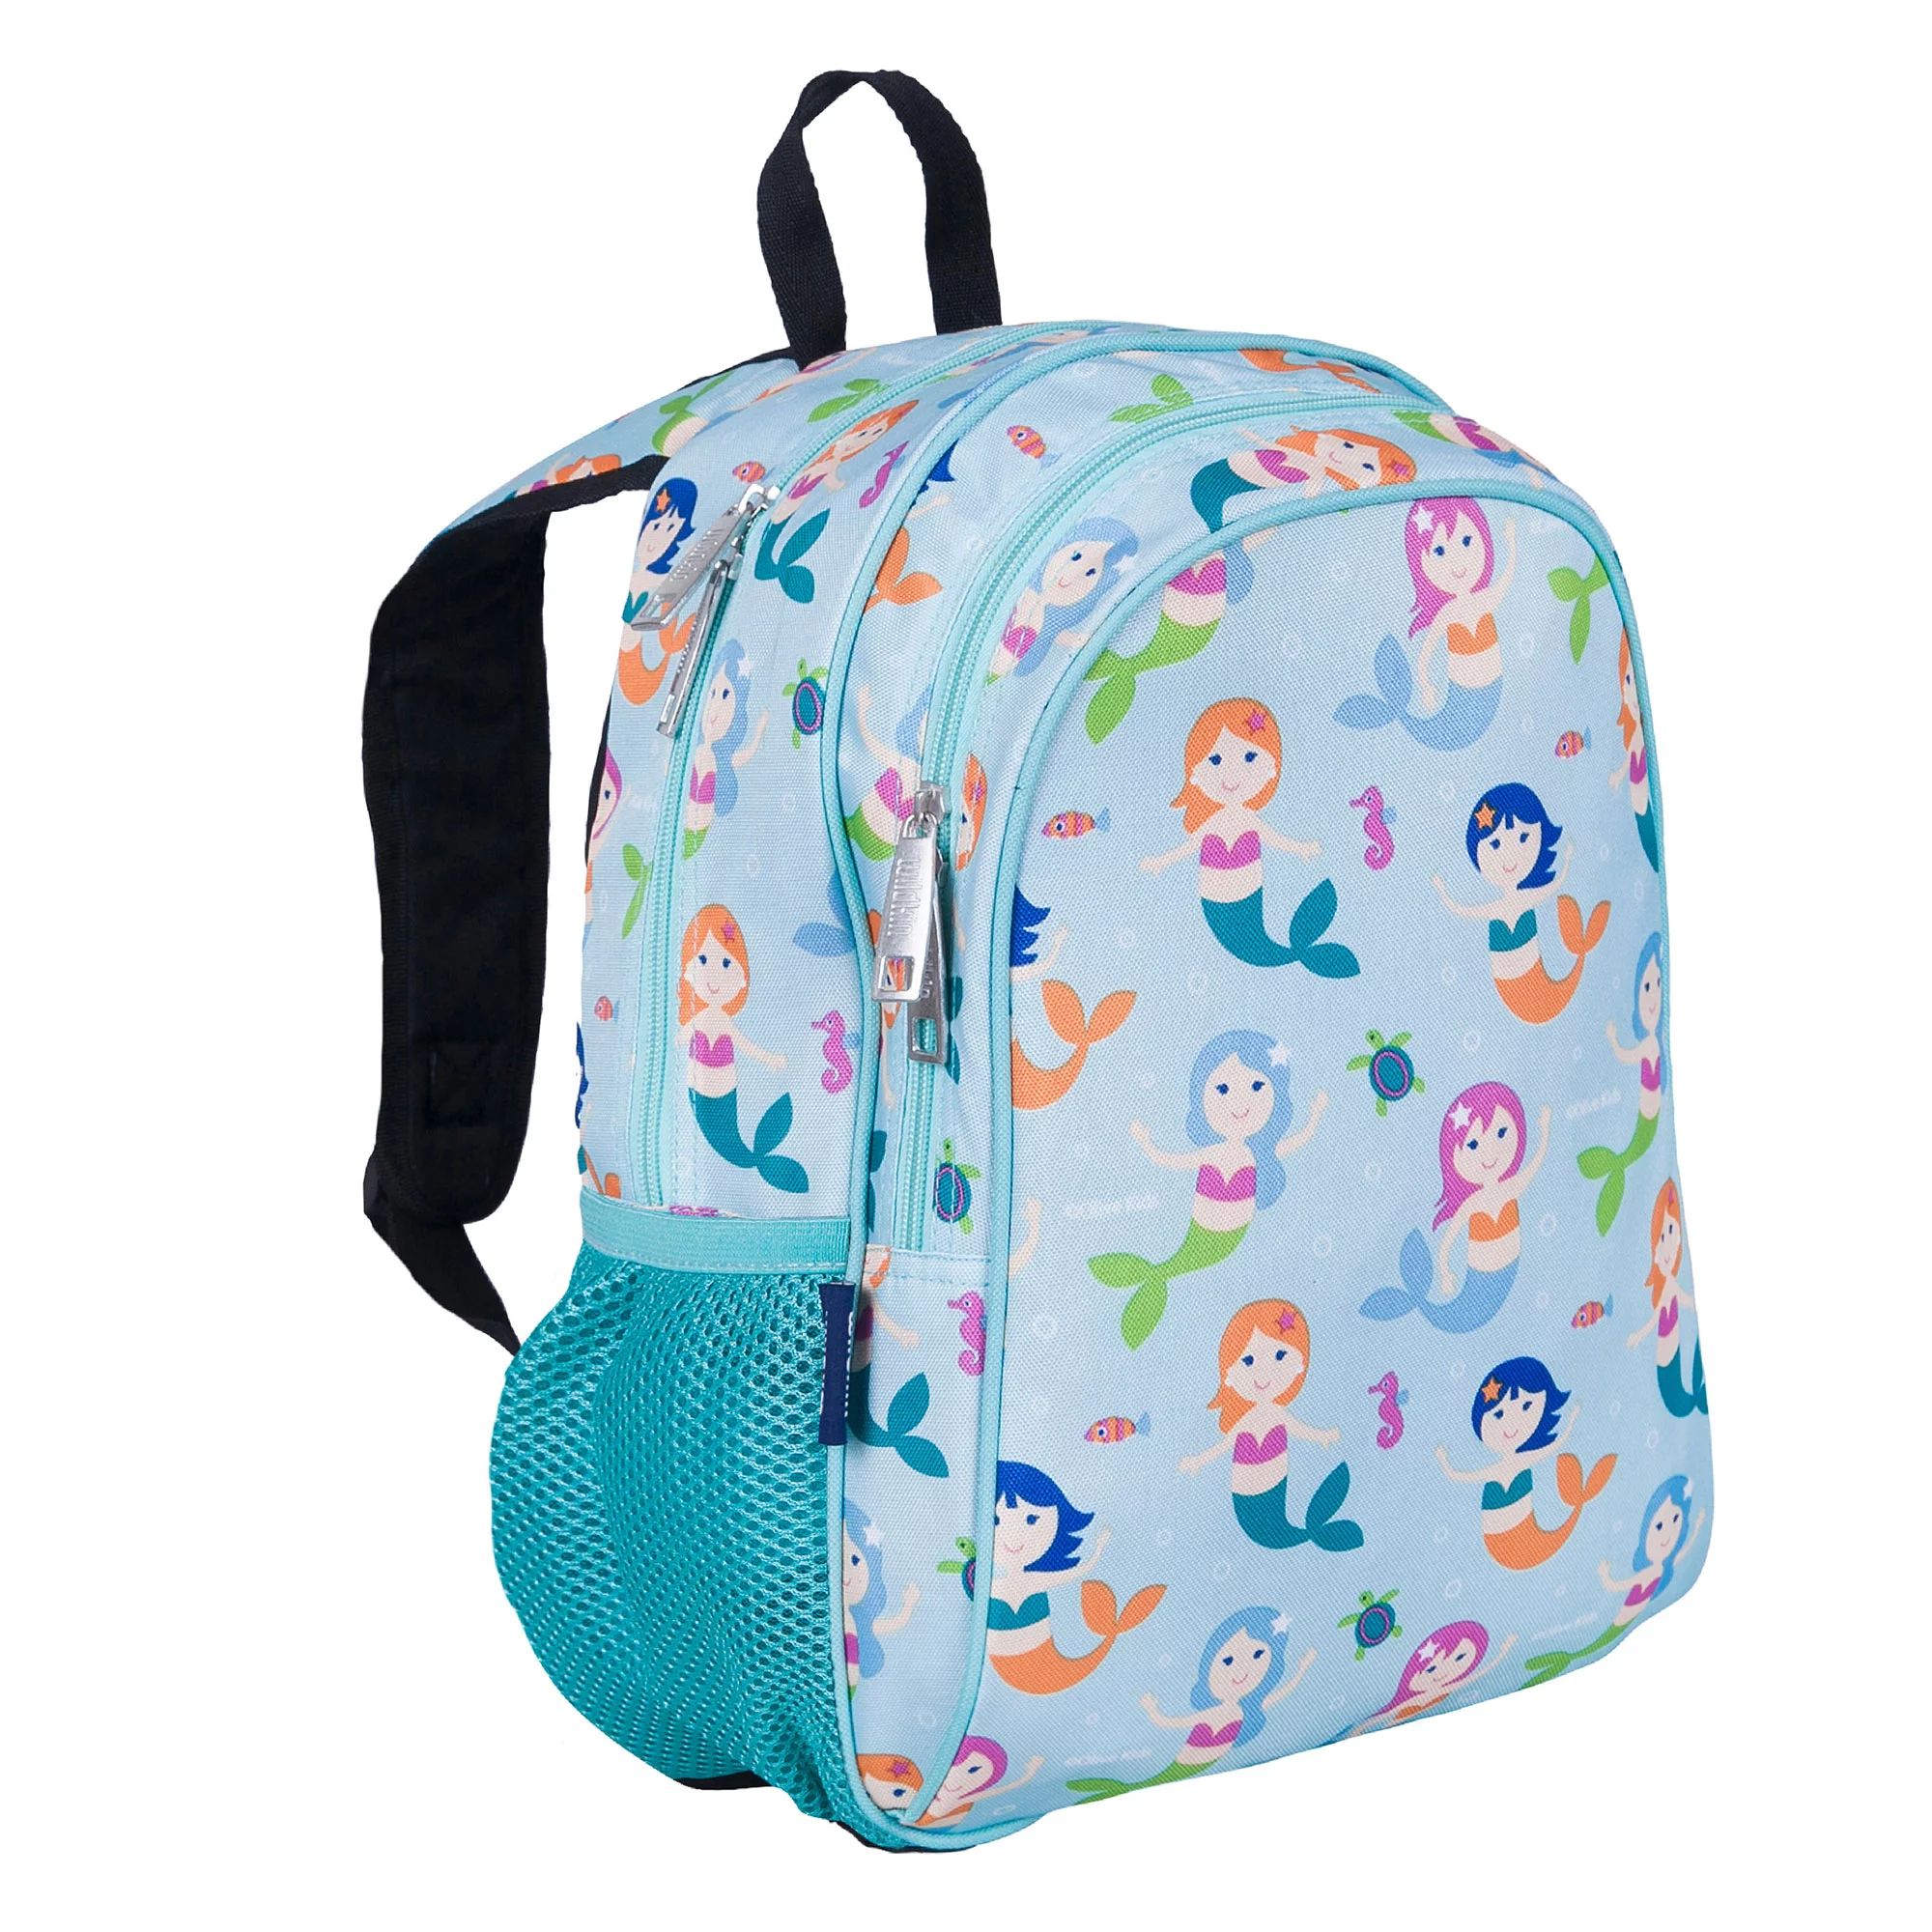 Wildkin Kids 15 Inch School and Travel Backpack for Boys and Girls (Mermaids Pink) | Walmart (US)